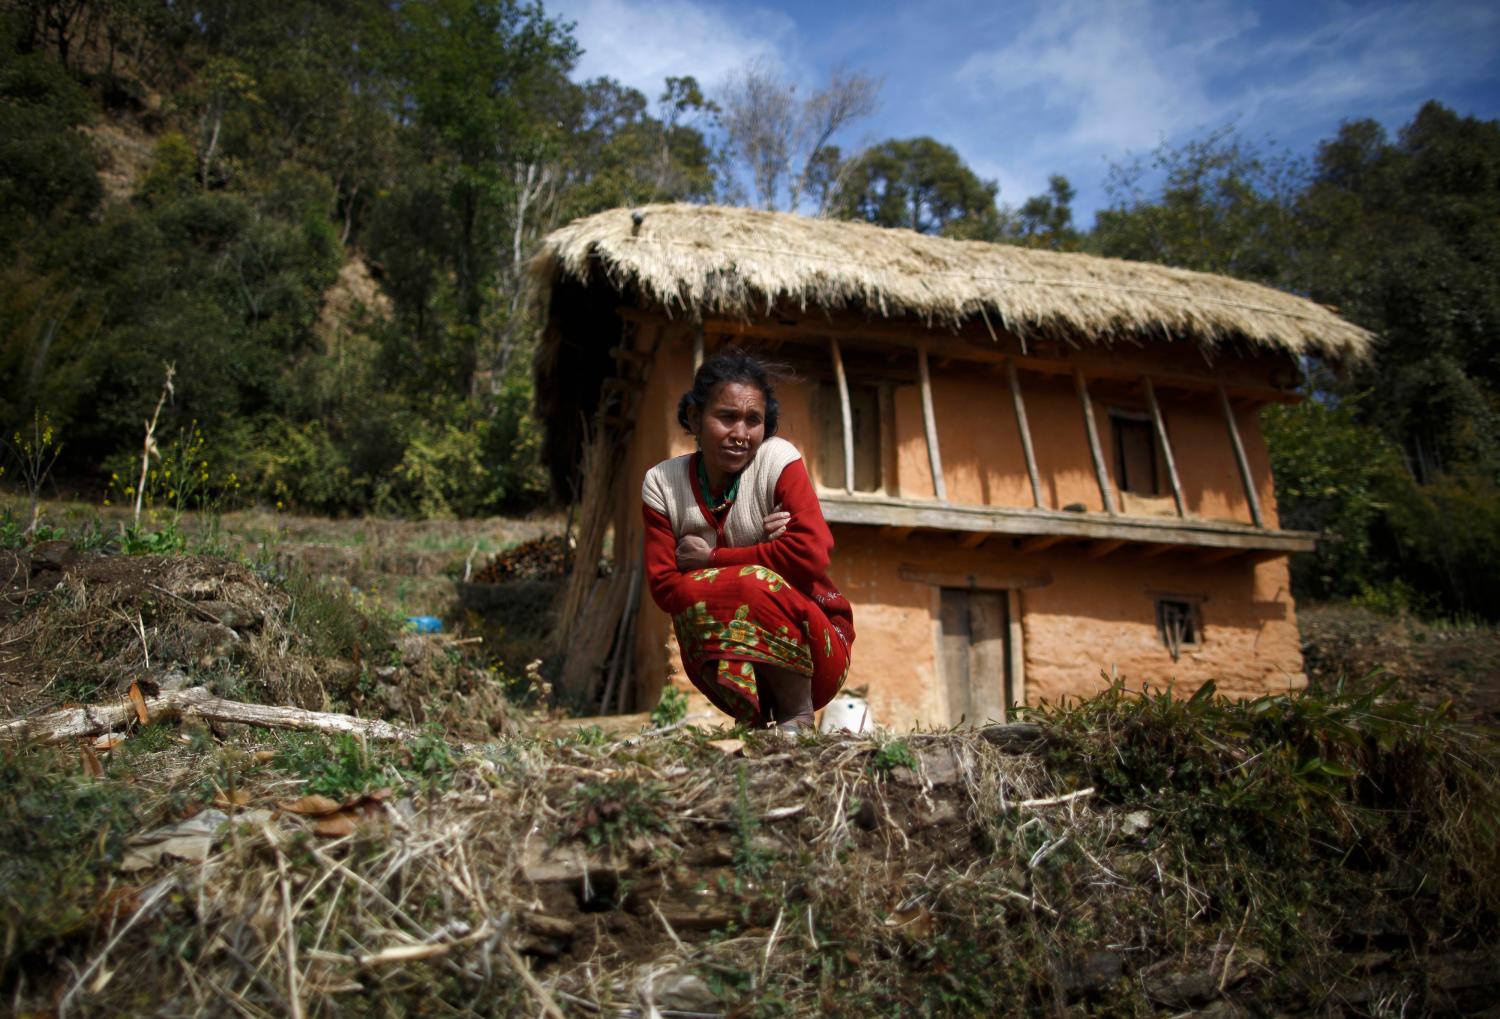 Jamuna Devi Saud, 45, sits outside her house while practicing Chaupadi in the hills of Legudsen village in Achham District in western Nepal February 16, 2014. Chaupadi is a tradition observed in parts of Nepal, which cuts women off from the rest of society when they are menstruating. Women who practice traditional chaupadi have to sleep in sheds or outbuildings while they are on their period, often with little protection from the elements. They are not allowed to enter houses or temples, use normal public water sources, take part in festivals or touch others during their menstruation, according to a United Nations field bulletin on the issue. Isolated in sheds that are frequently rickety and unhygienic, there have been cases of women dying while practicing chaupadi from illness, exposure, animal attacks or from fires lit in poorly ventilated spaces. Chaupadi was banned by Nepal's Supreme Court in 2005, but it is still common in the country's far and mid-western regions. Picture taken February 16, 2014. REUTERS/Navesh Chitrakar (NEPAL - Tags: SOCIETY)ATTENTION EDITORS: PICTURE 18 OF 20 FOR PACKAGE 'BANISHED ONCE A MONTH' TO FIND ALL IMAGES SEARCH 'CHAUPADI' - GM1EA350LH601